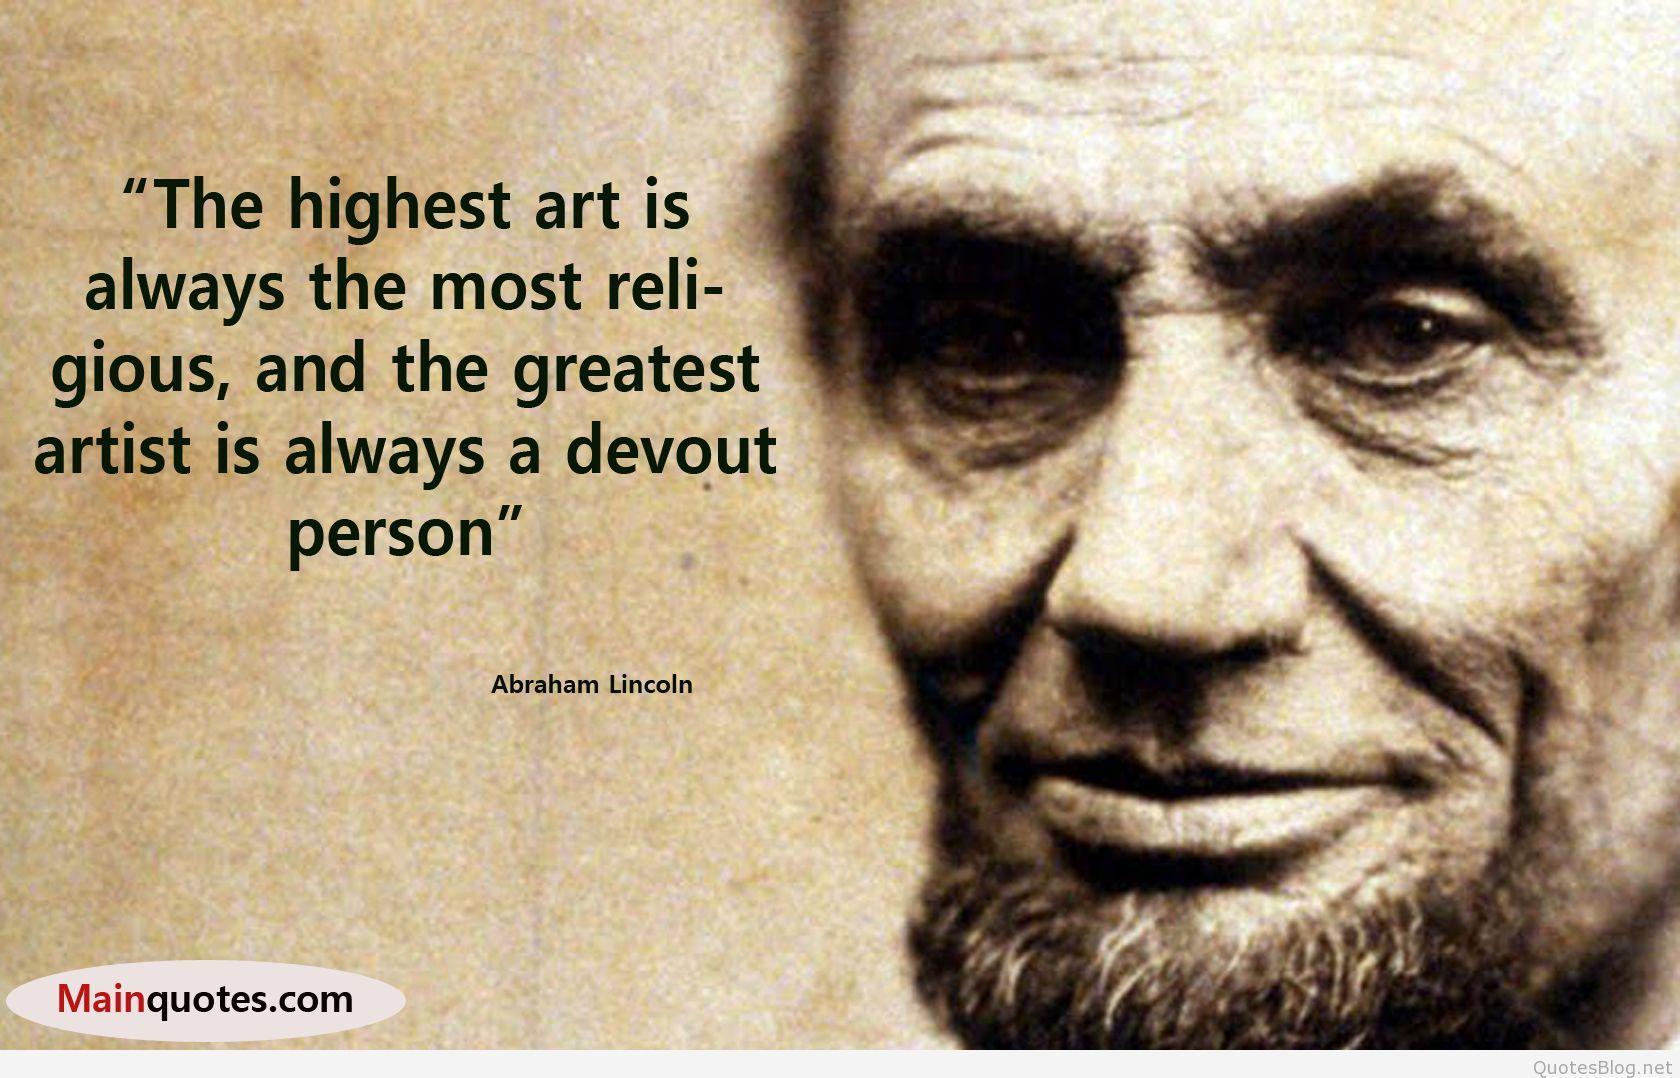 Best Inspirational Abraham Lincoln quotes